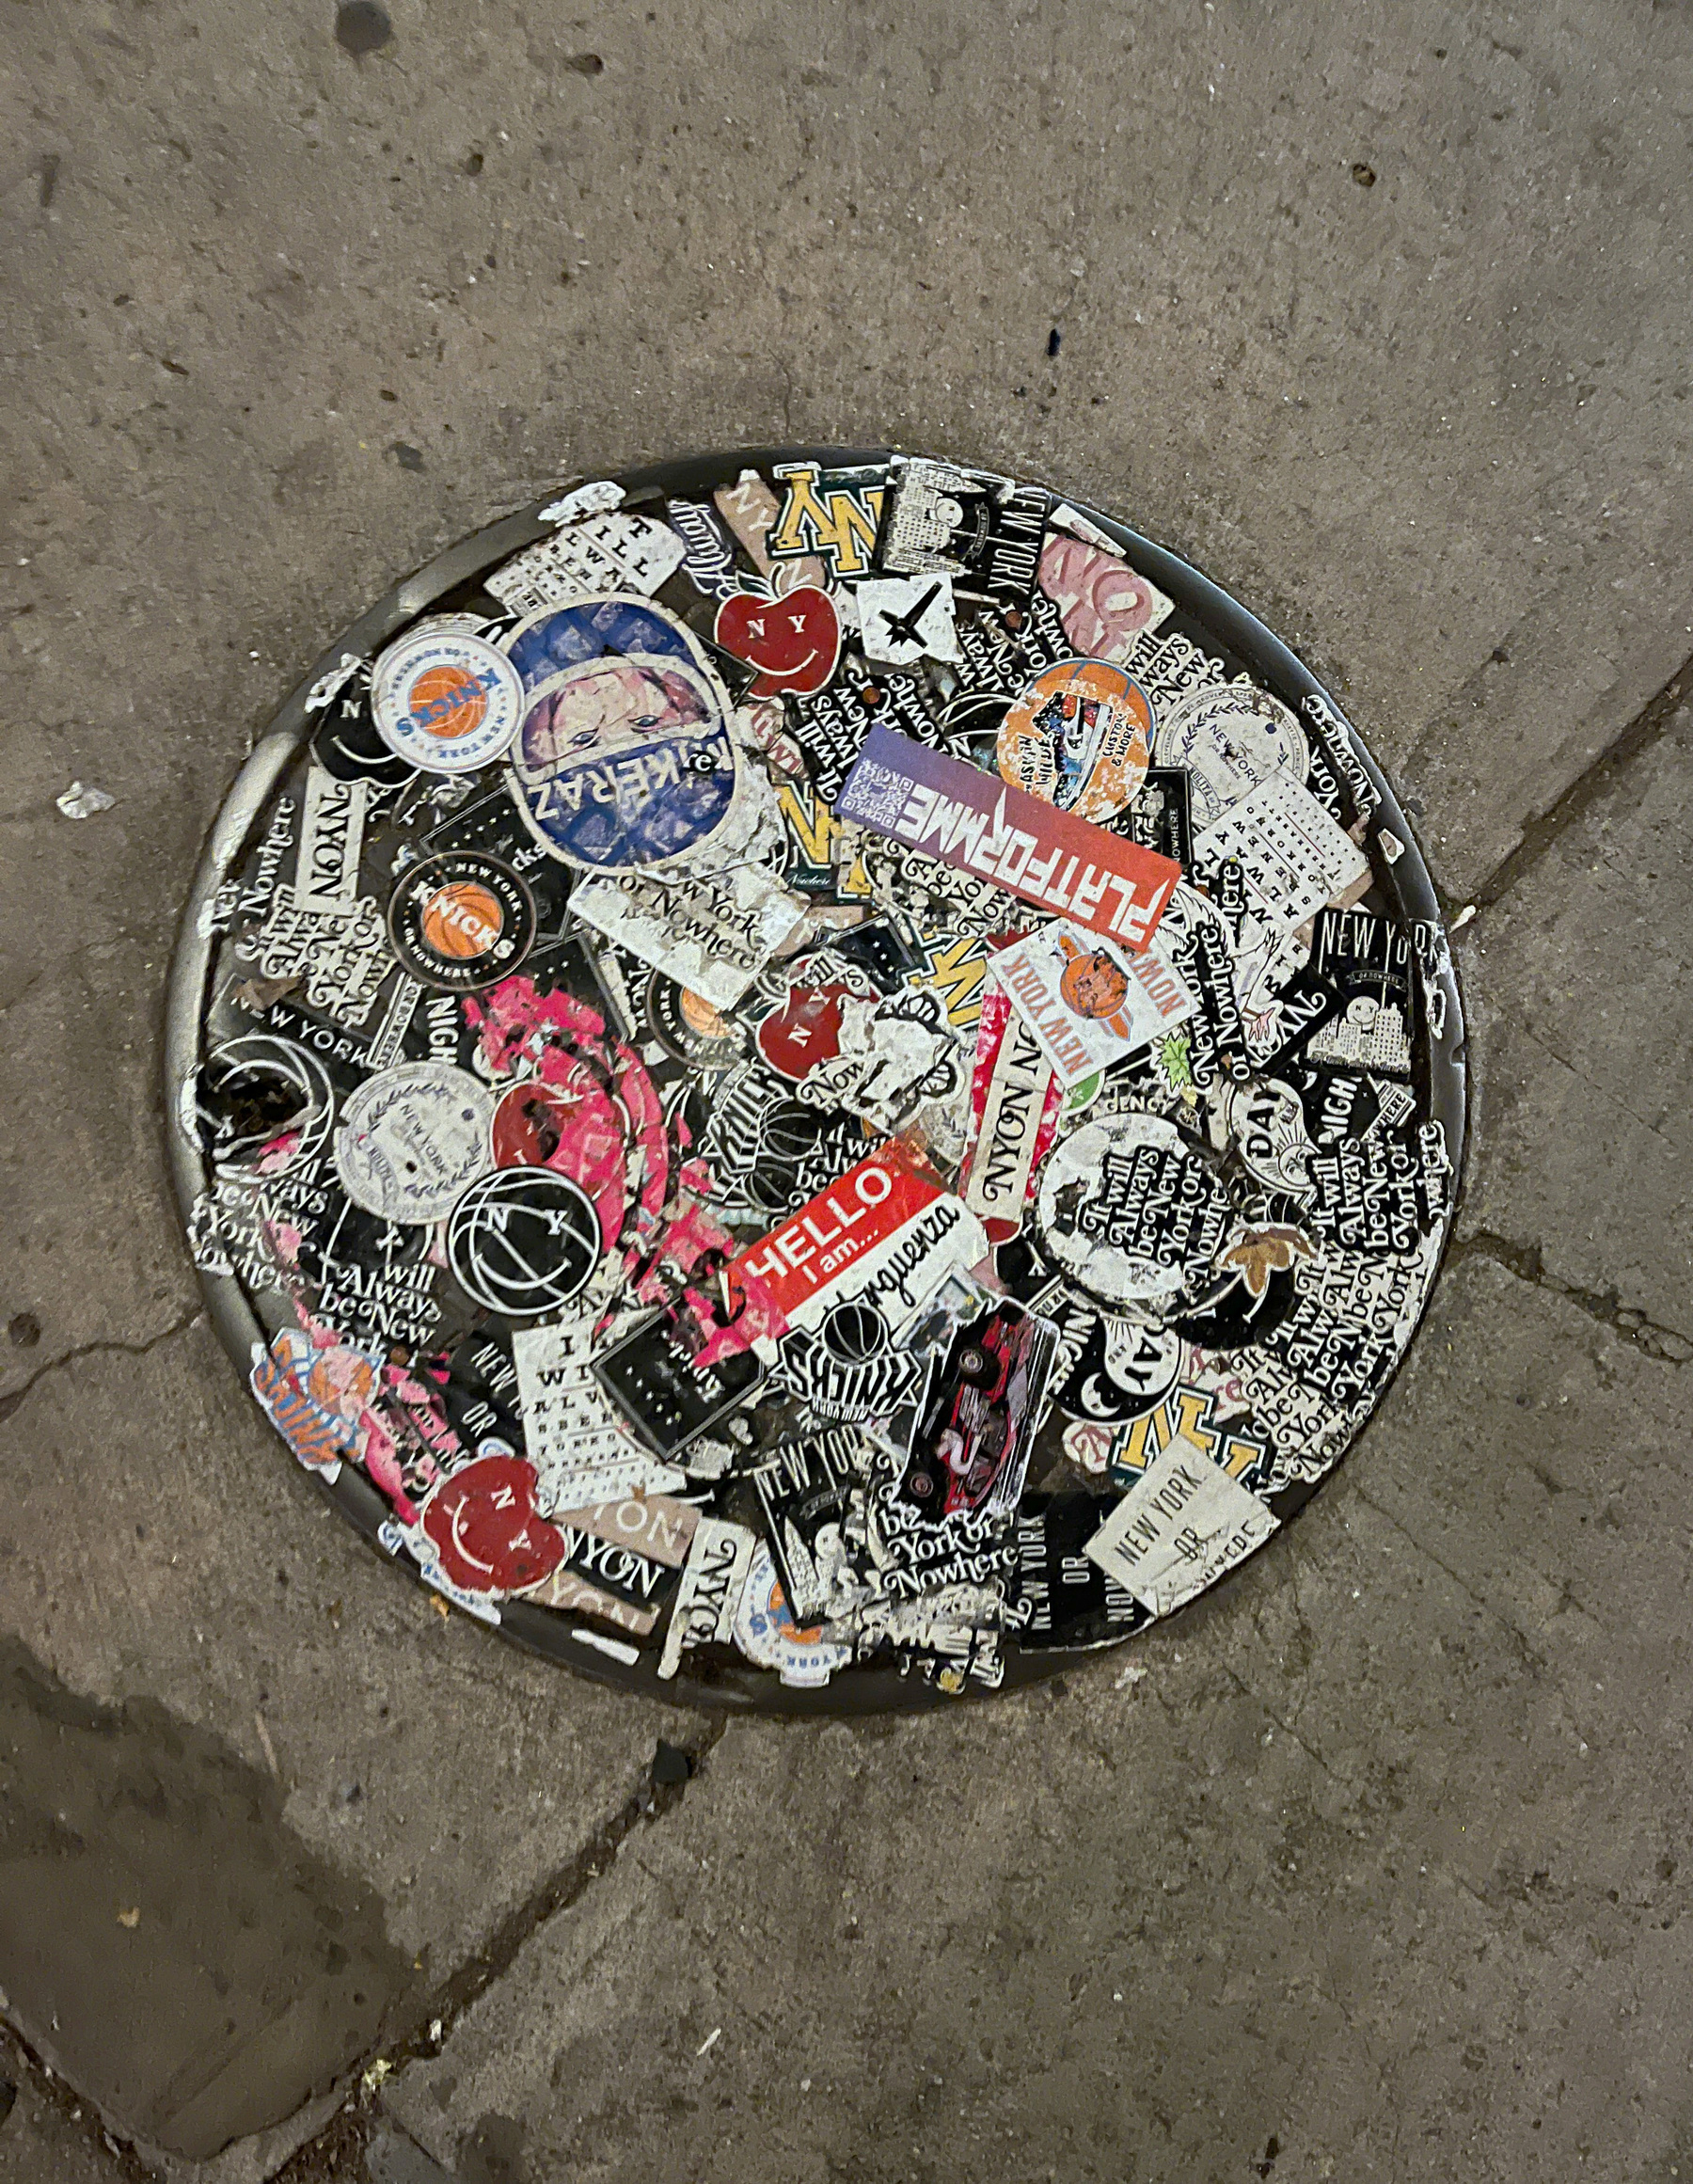 A manhole lid covered in various stickers, mostly look like graffiti and various writings.